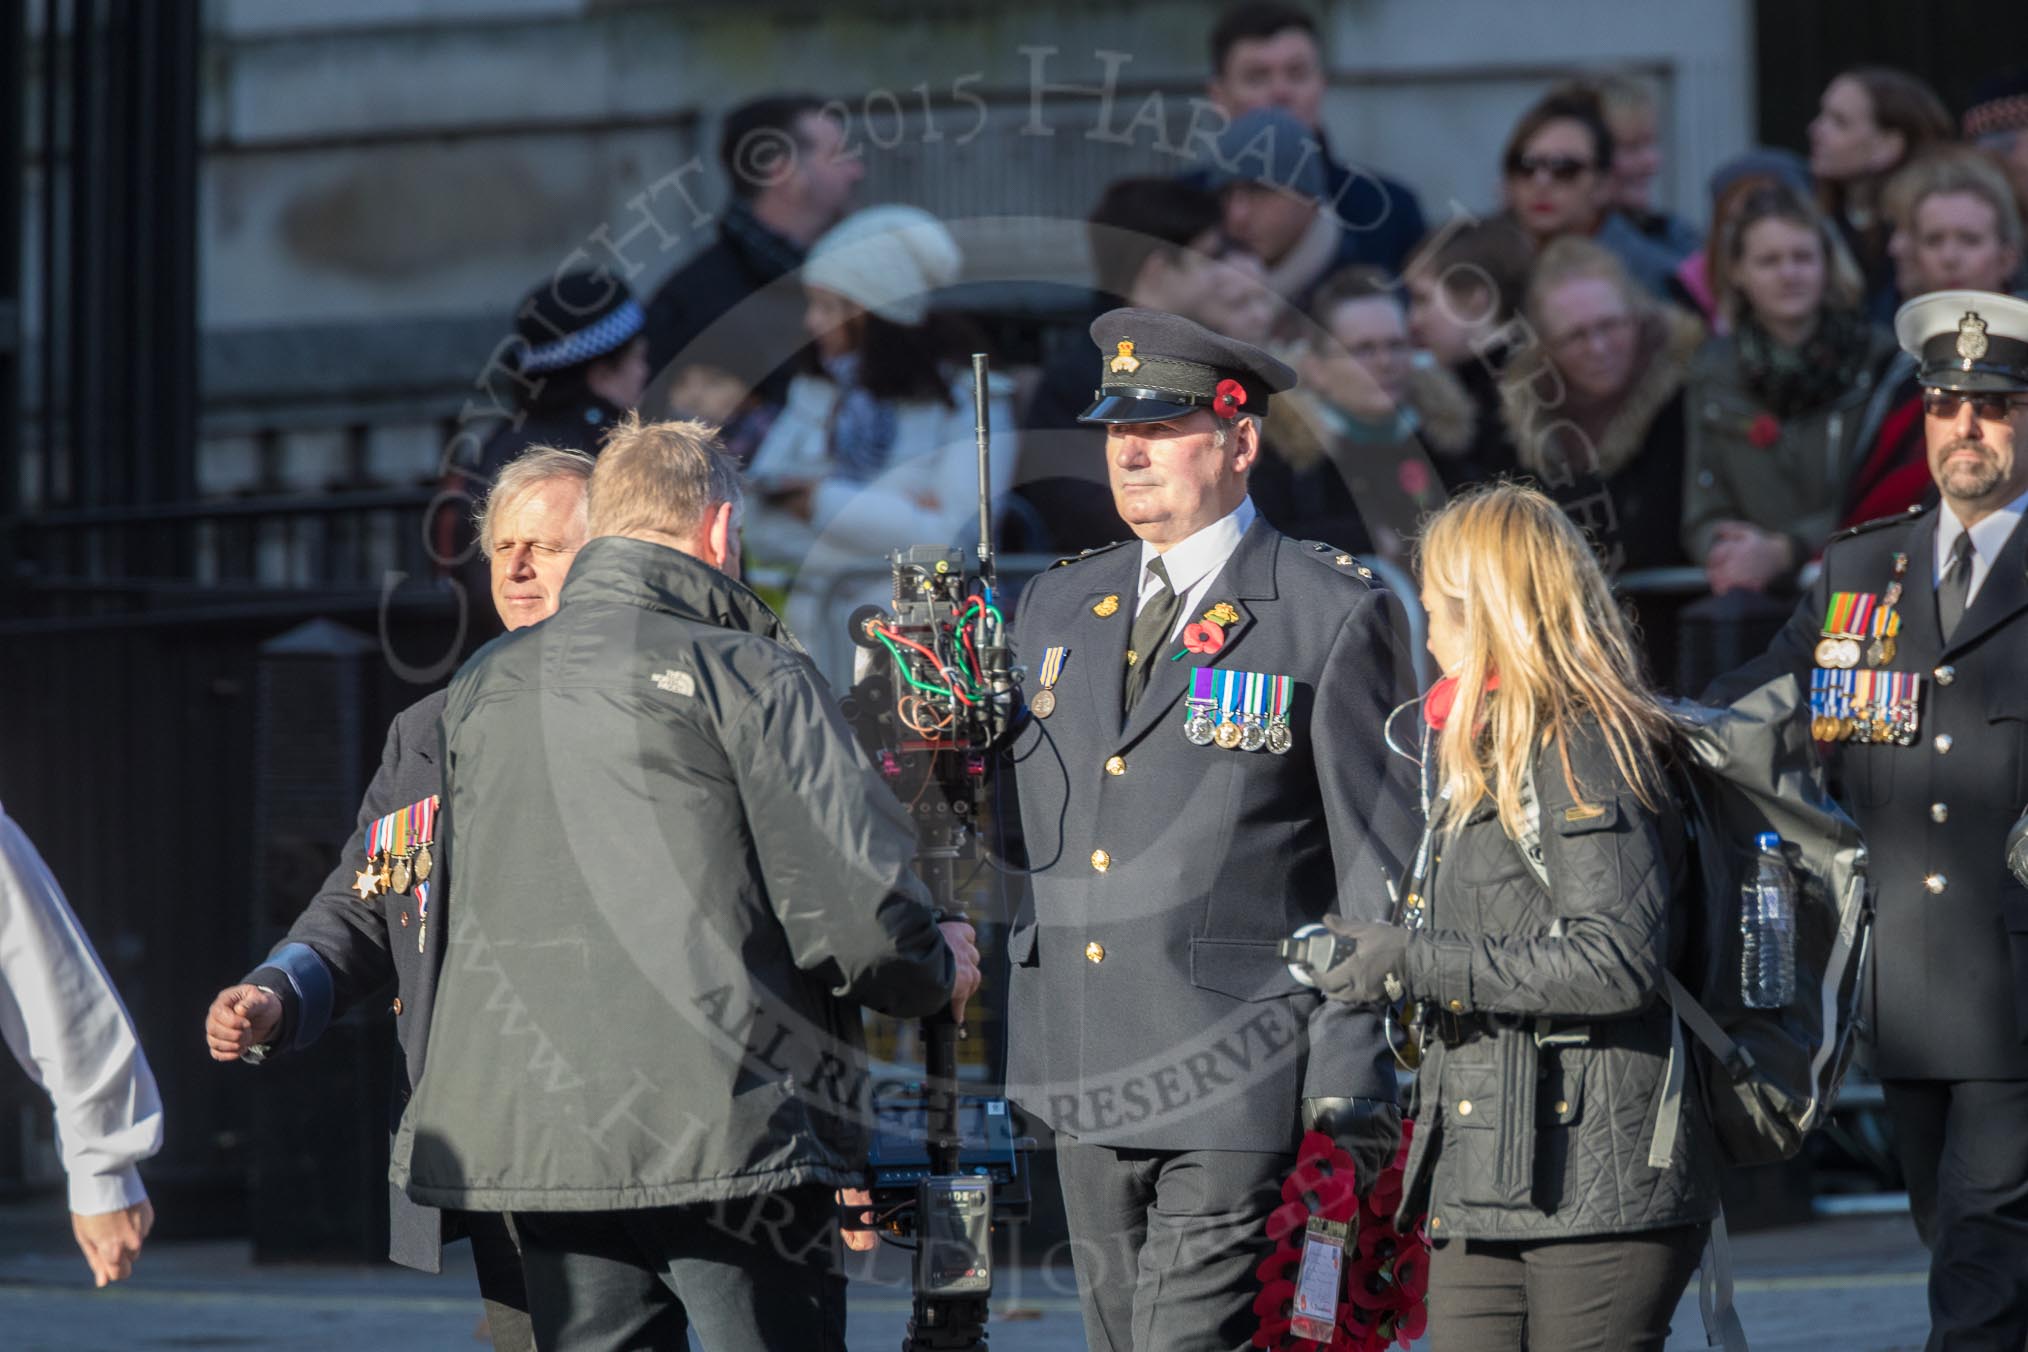 March Past, Remembrance Sunday at the Cenotaph 2016: M52 Munitions Workers Association.
Cenotaph, Whitehall, London SW1,
London,
Greater London,
United Kingdom,
on 13 November 2016 at 13:20, image #3056